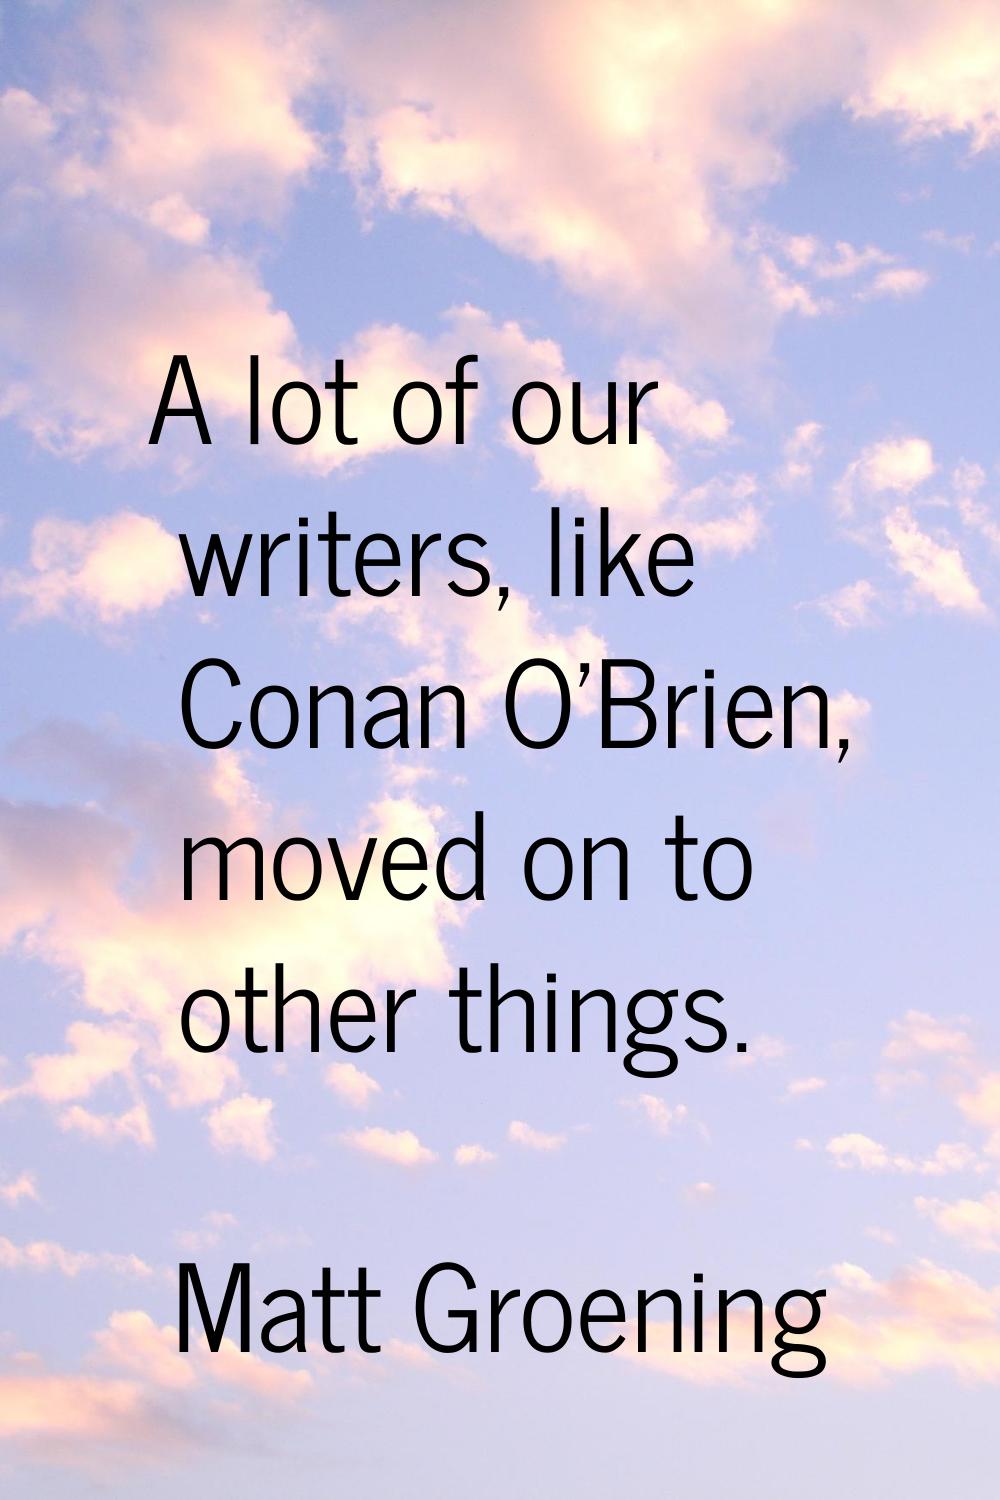 A lot of our writers, like Conan O'Brien, moved on to other things.